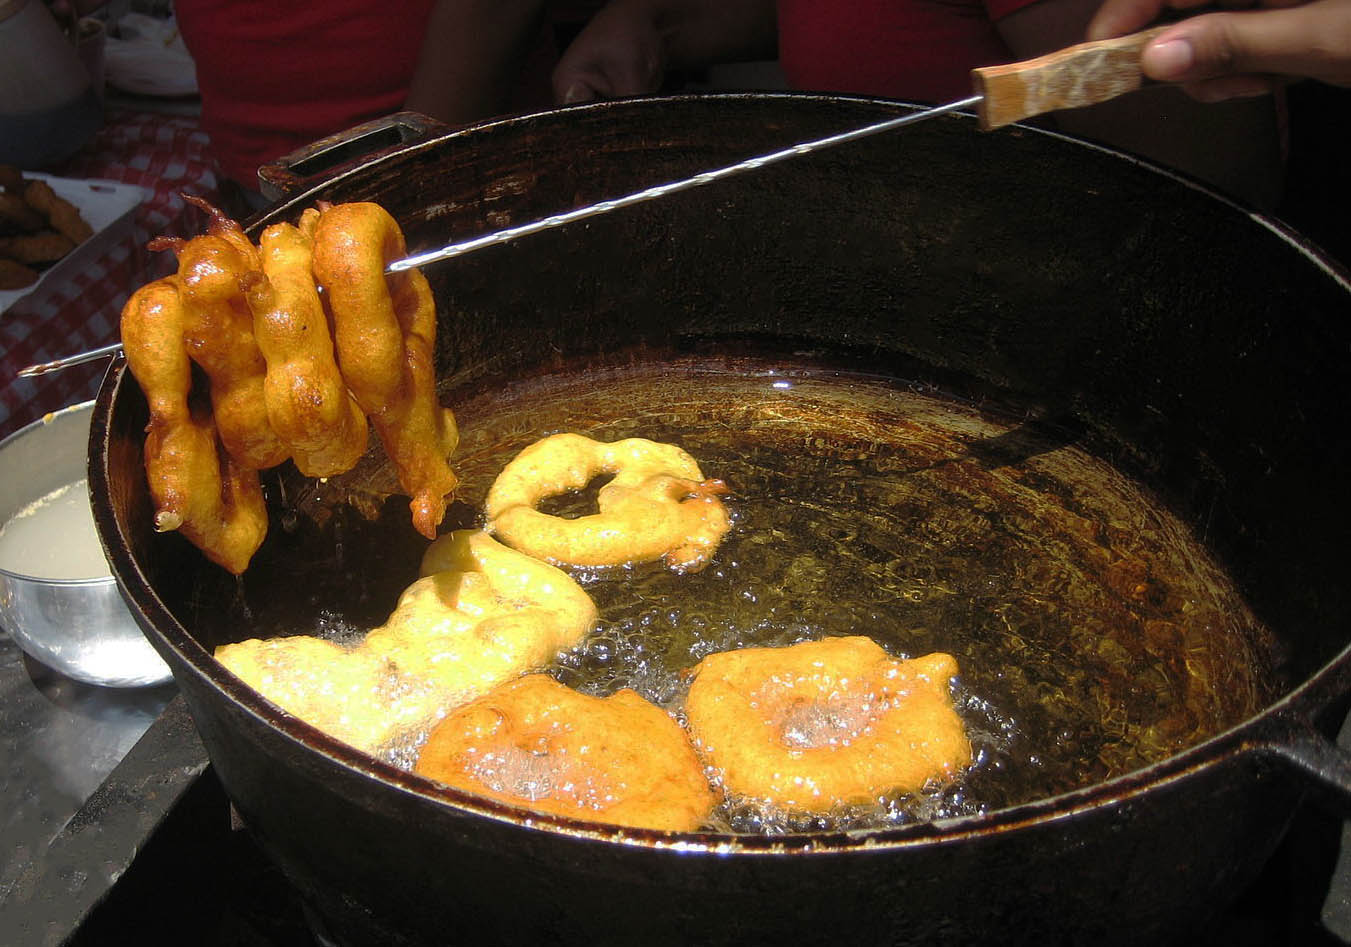 Peruvian dessert, picarones, being fried in a pot of oil.